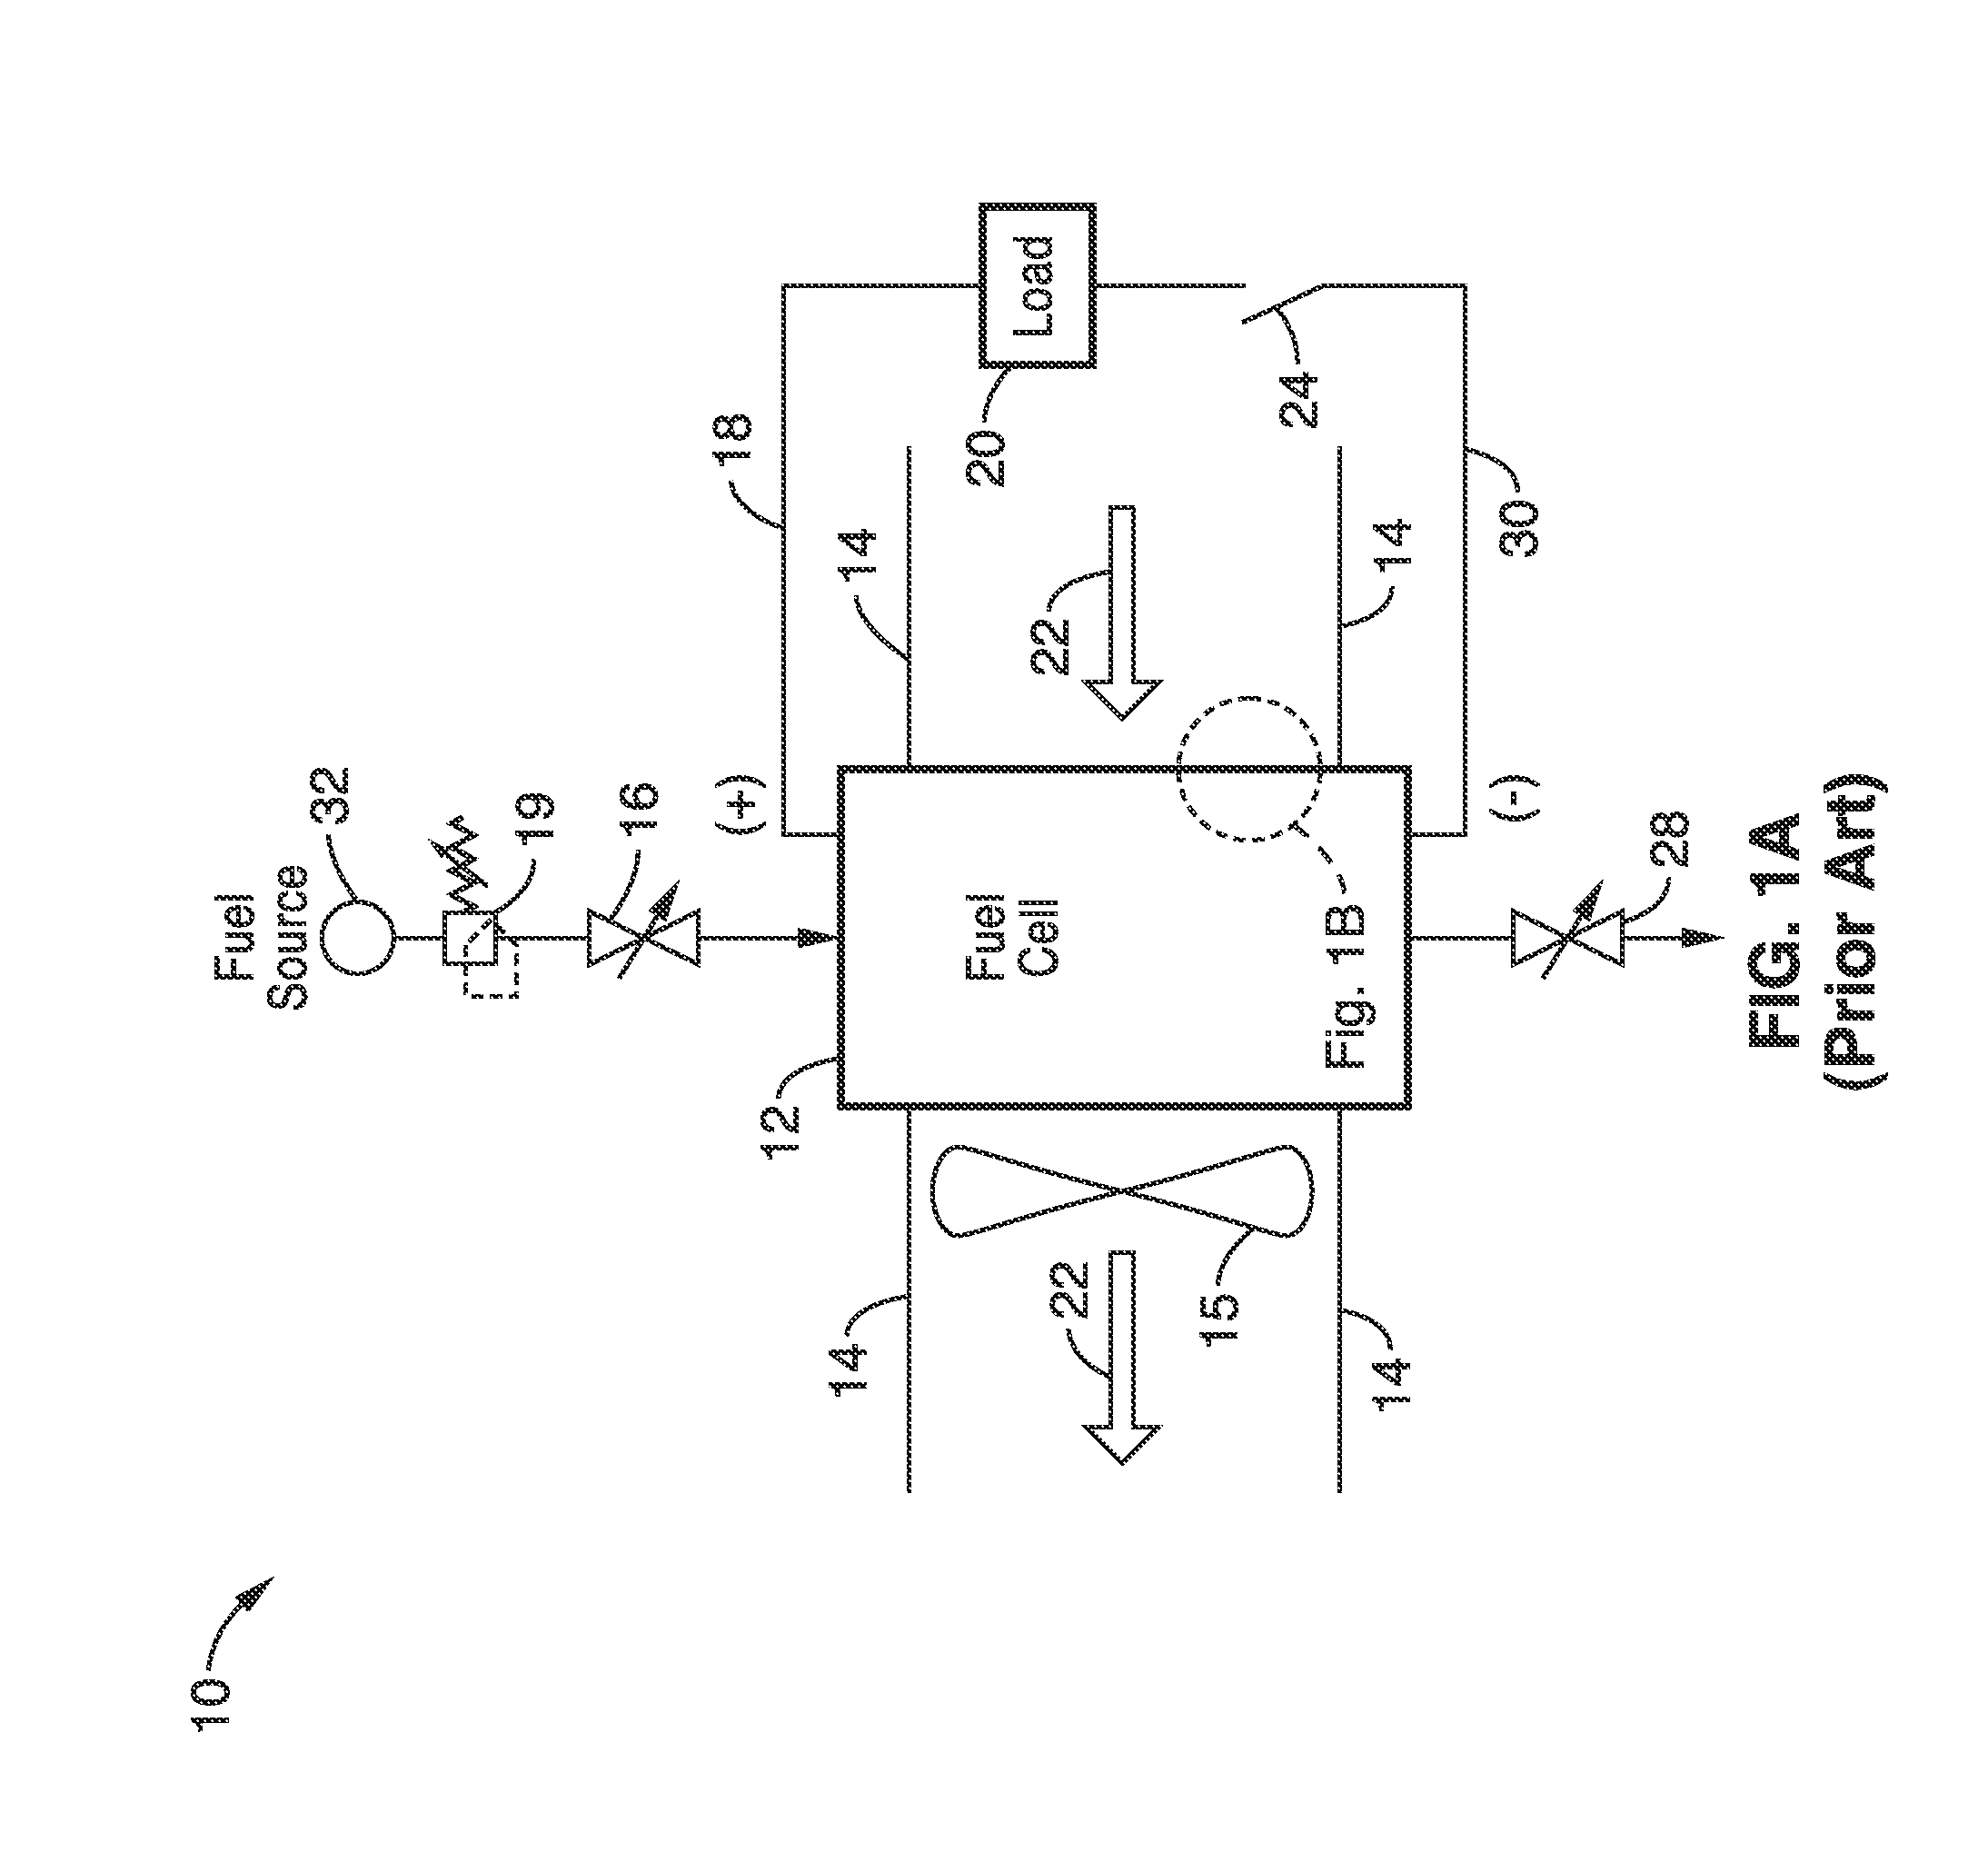 Integrated recirculating fuel cell system